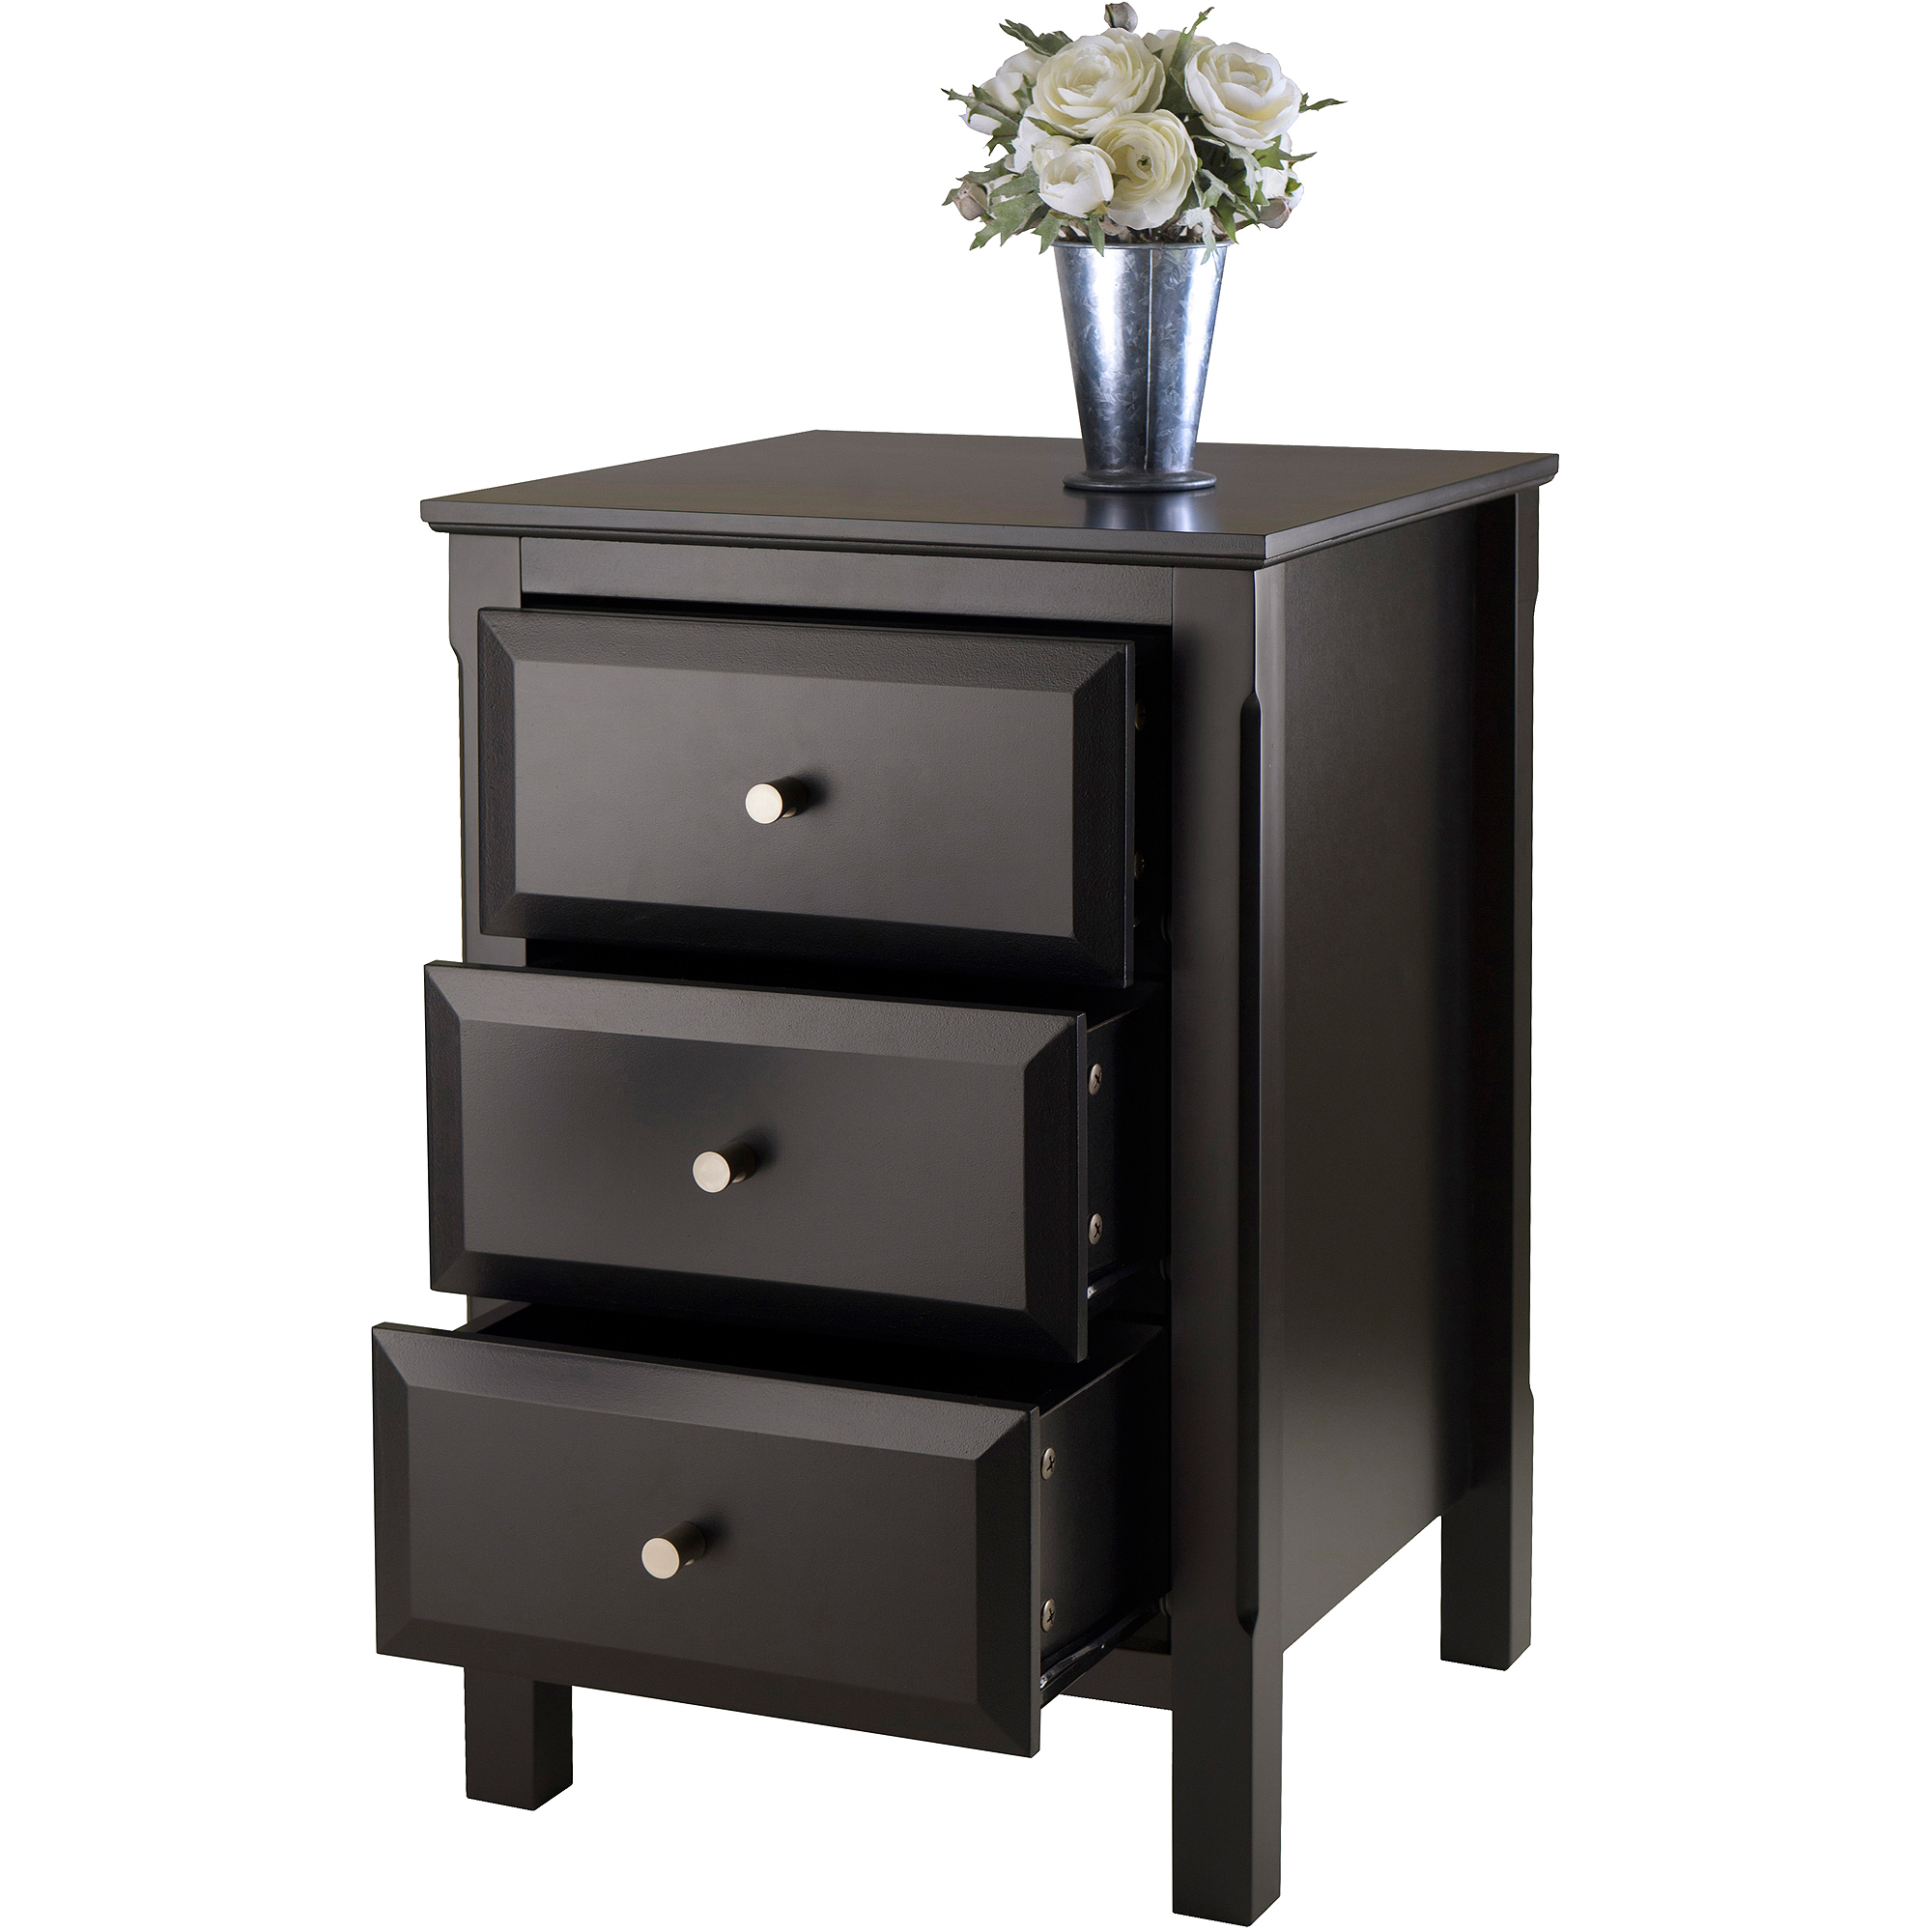 winsome timmy nightstand accent table black extra tall decorative storage cabinets pottery barn round chair sofa with chairs narrow cabinet doors wood trestle base antique corner